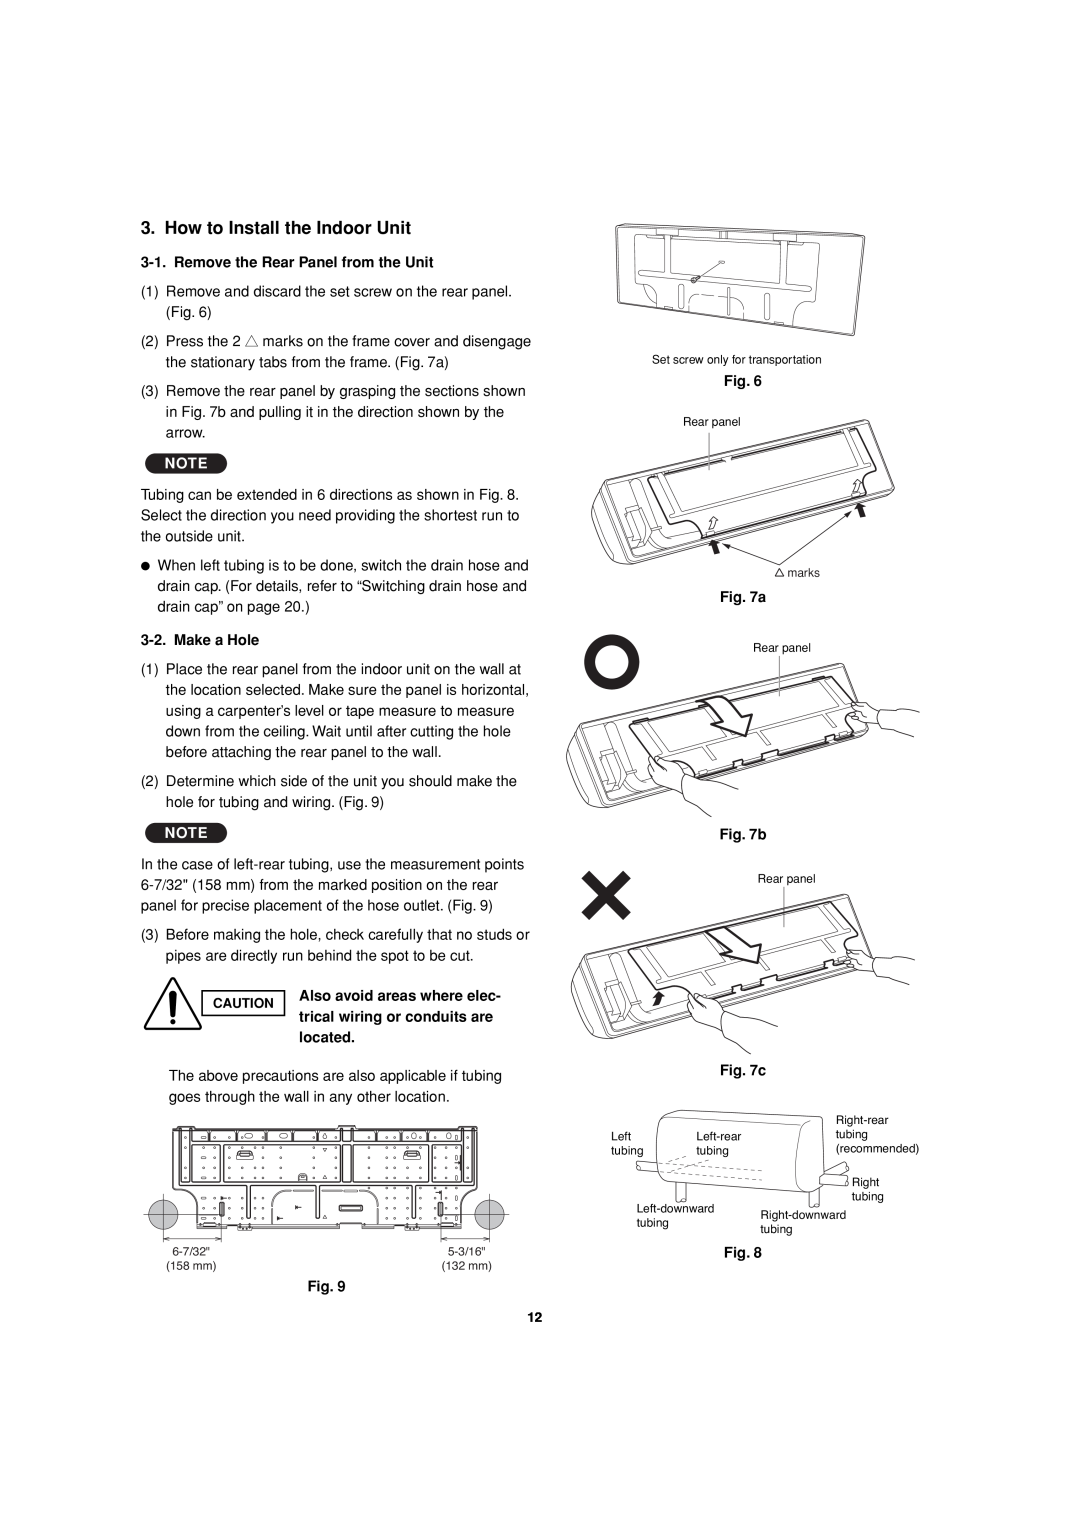 Sanyo C3082, C3682 How to Install the Indoor Unit, Remove the Rear Panel from the Unit, Make a Hole, located, b 